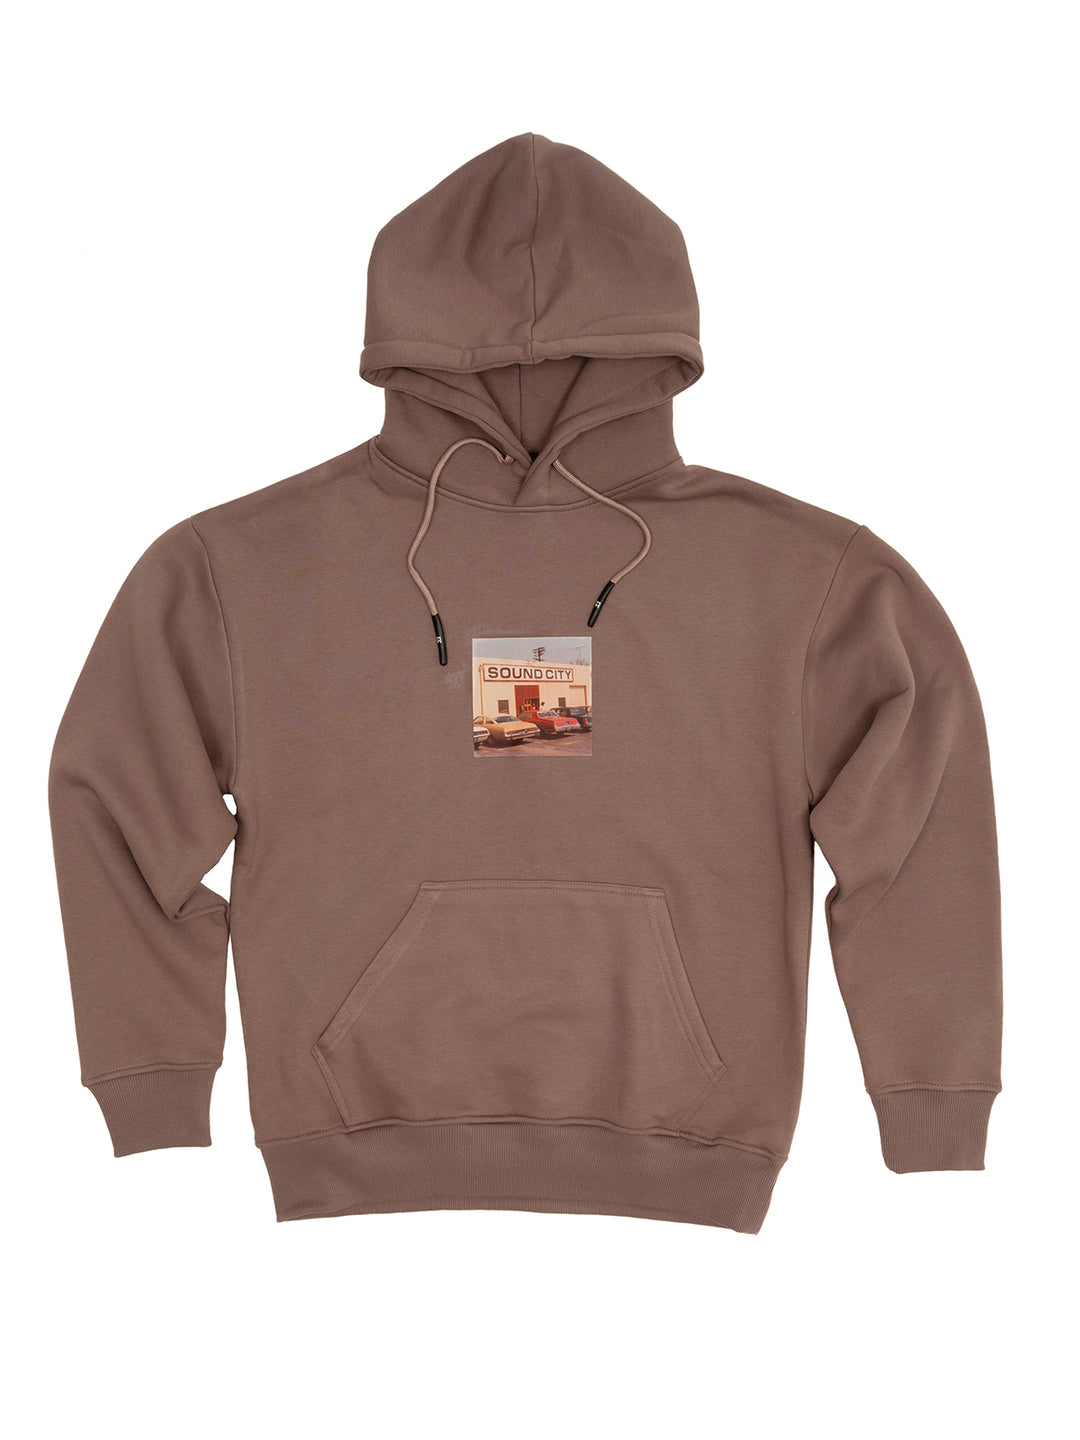 Sound City / Oversized Pullover Hoodie